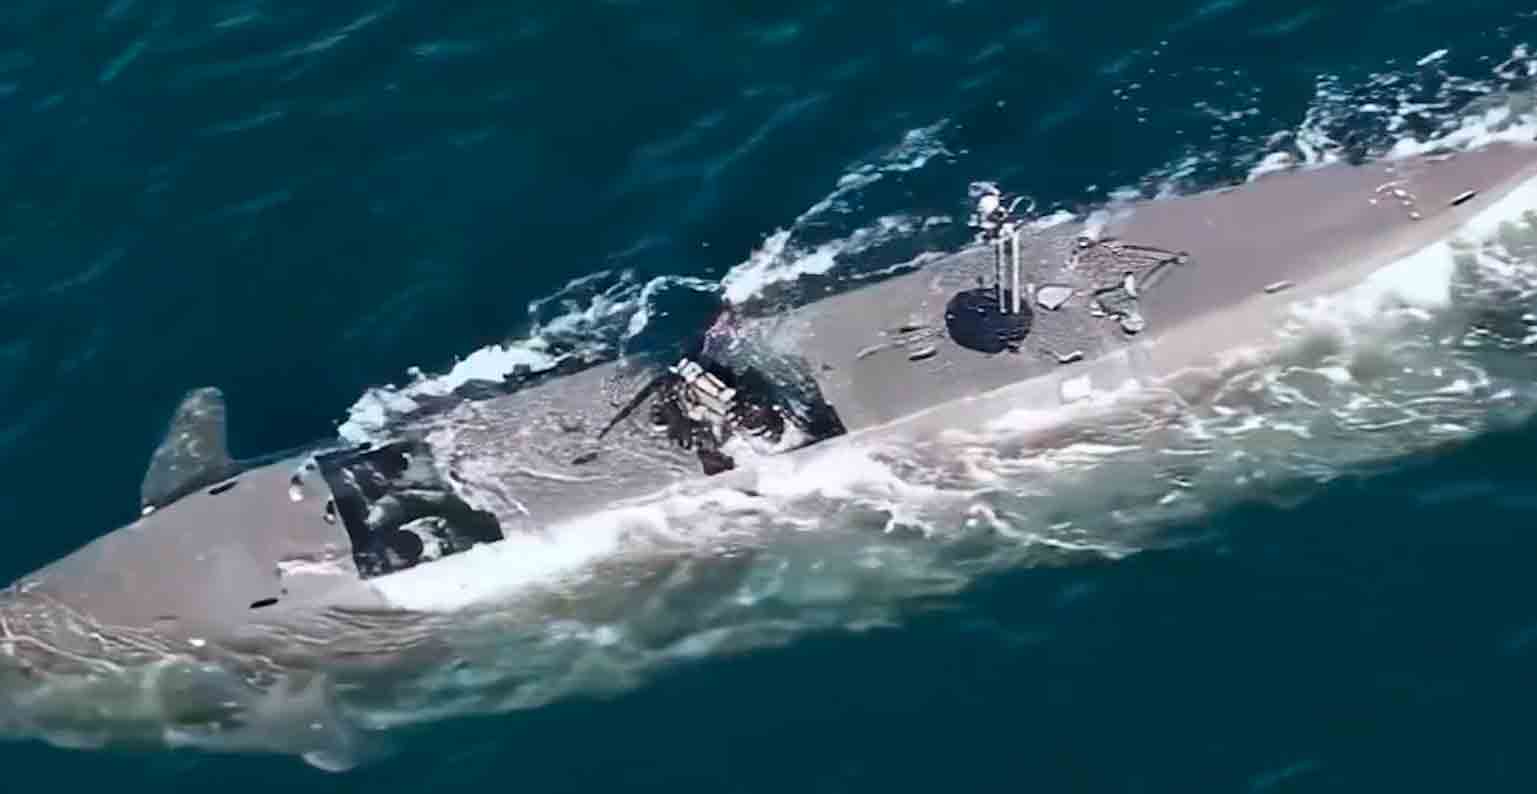 A video from the Swedish army shows a special forces boat that can operate as a submarine